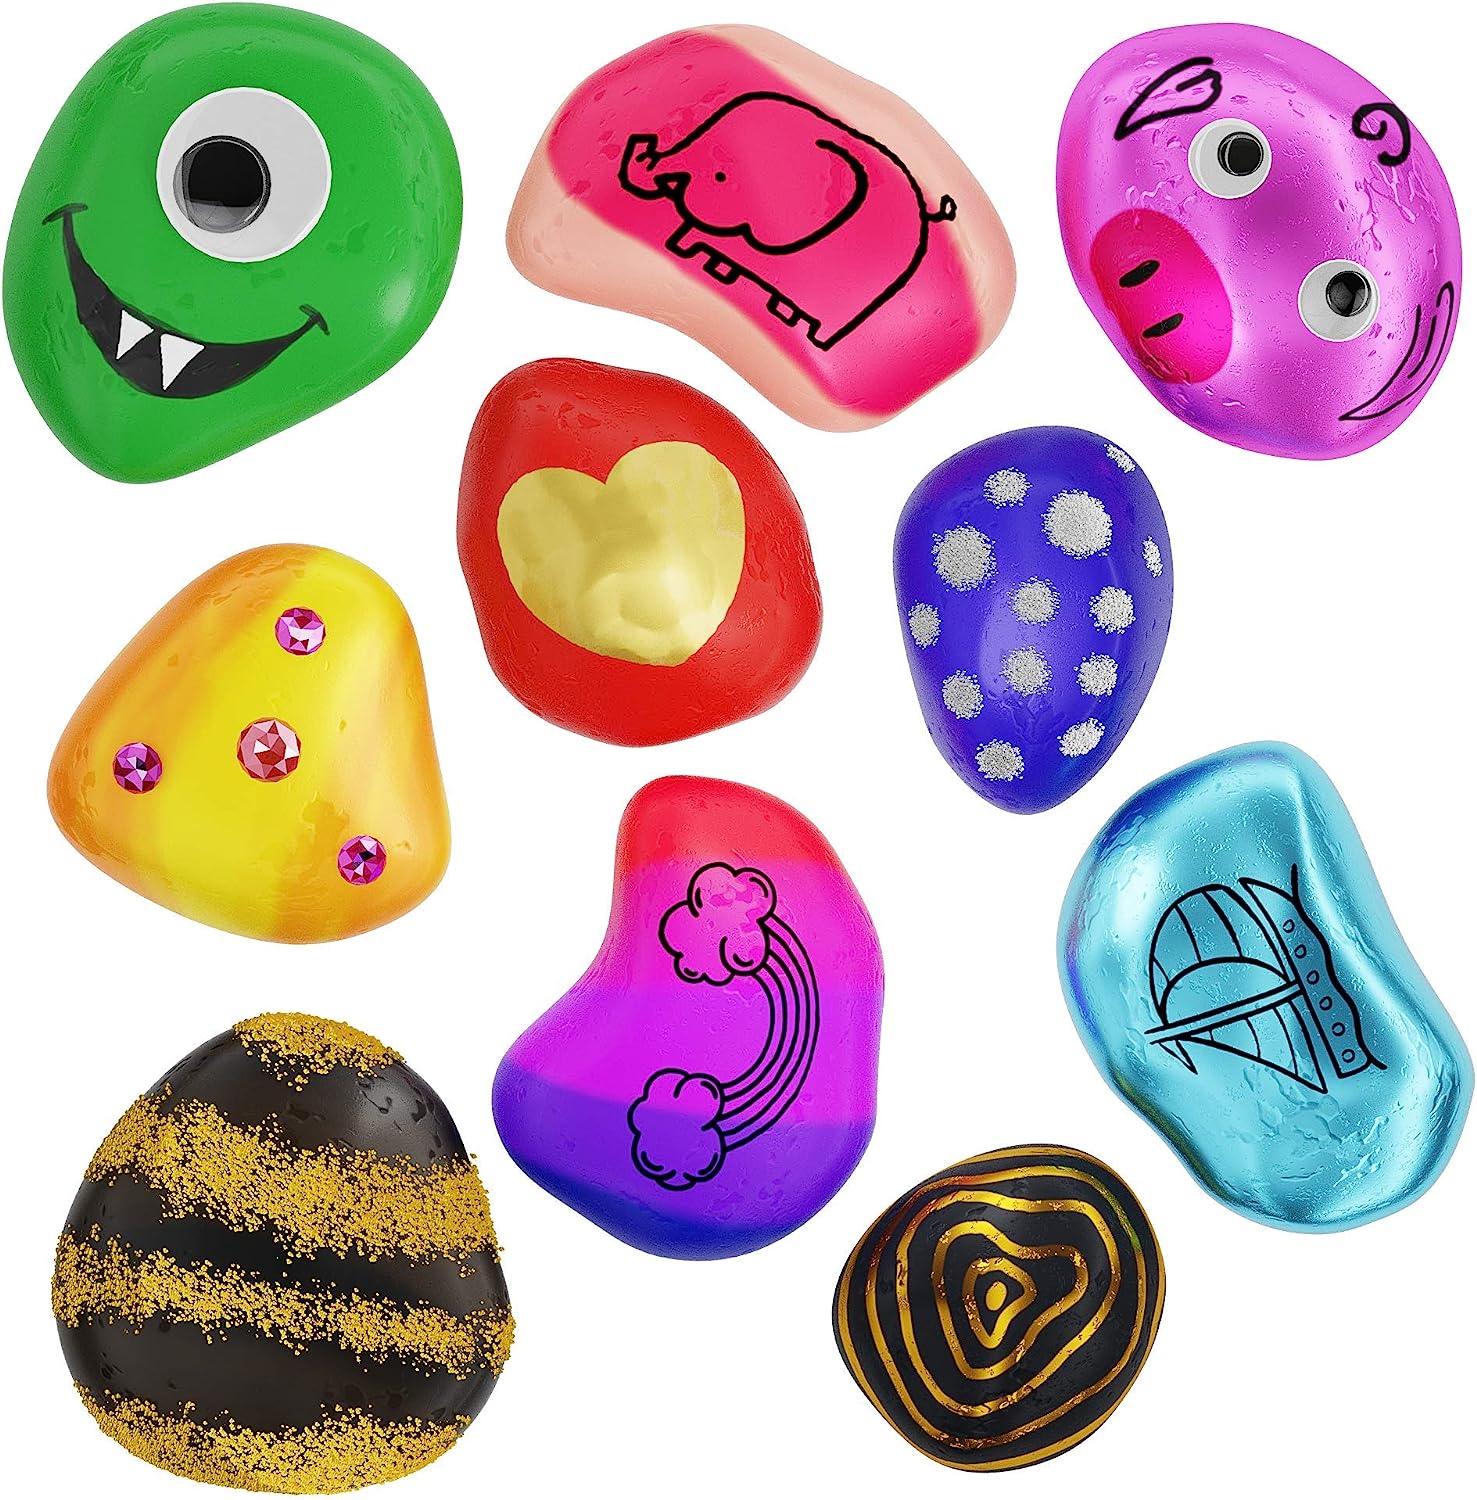 Rock Painting Kit for Kids - Arts and Crafts for Girls & Boys Ages 6-12 - Craft Kits Art Set - Supplies for Painting Rocks - Best Tween Paint Gift Ideas for Kids Activities Age 6 7 8 9 10 11